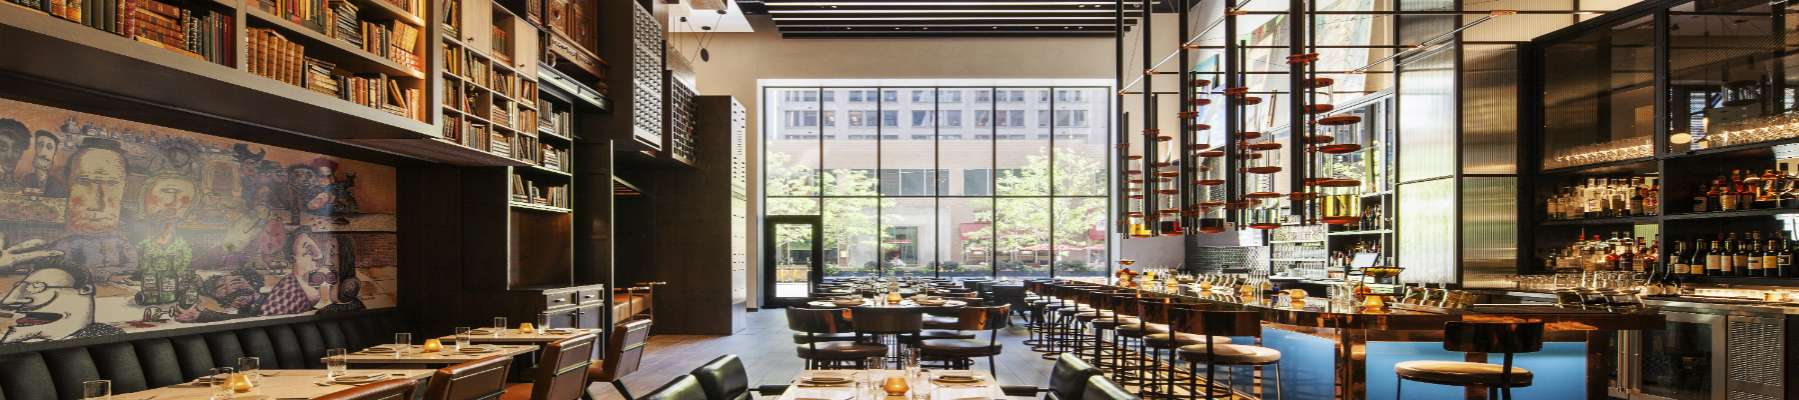 Best Restaurants in Chicago - The Magnificent Mile